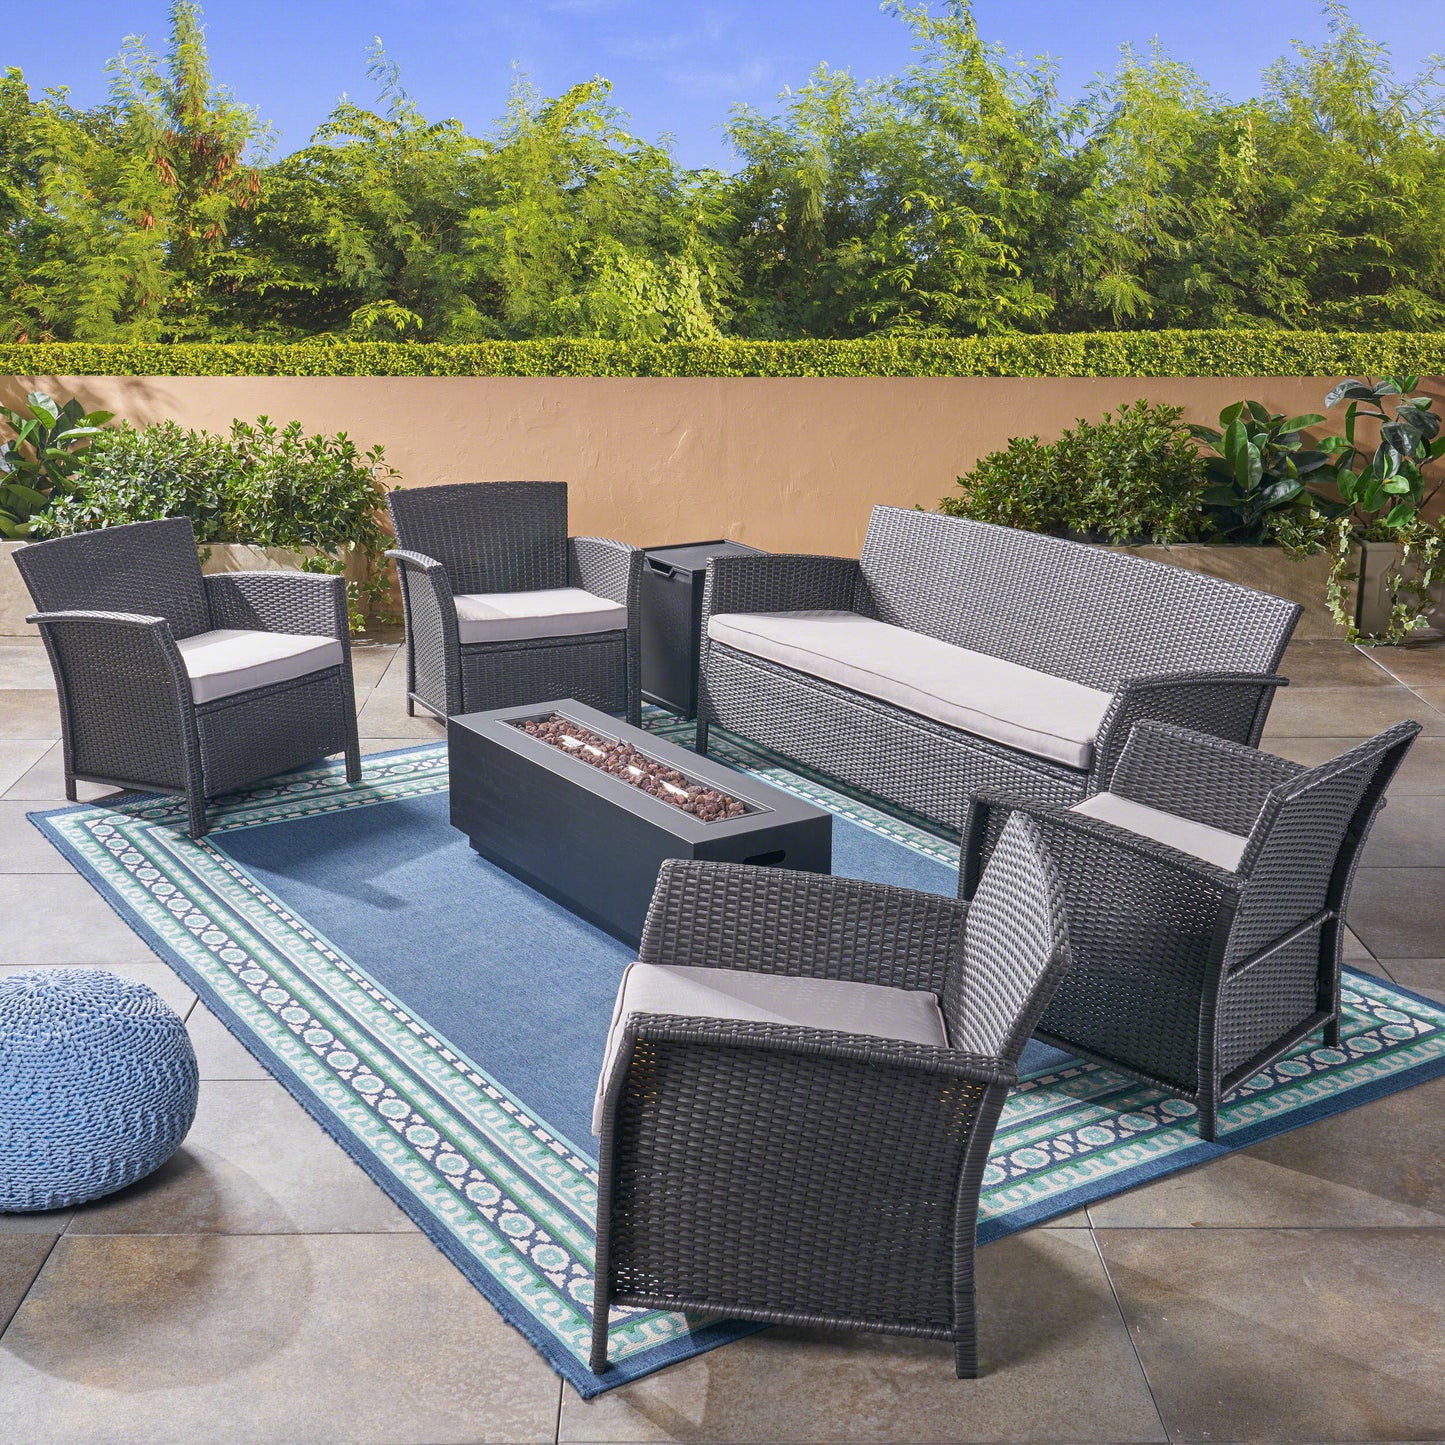 Mason Outdoor 7 Seater Wicker Chat Set with Fire Pit, Gray and Silver and Dark Gray